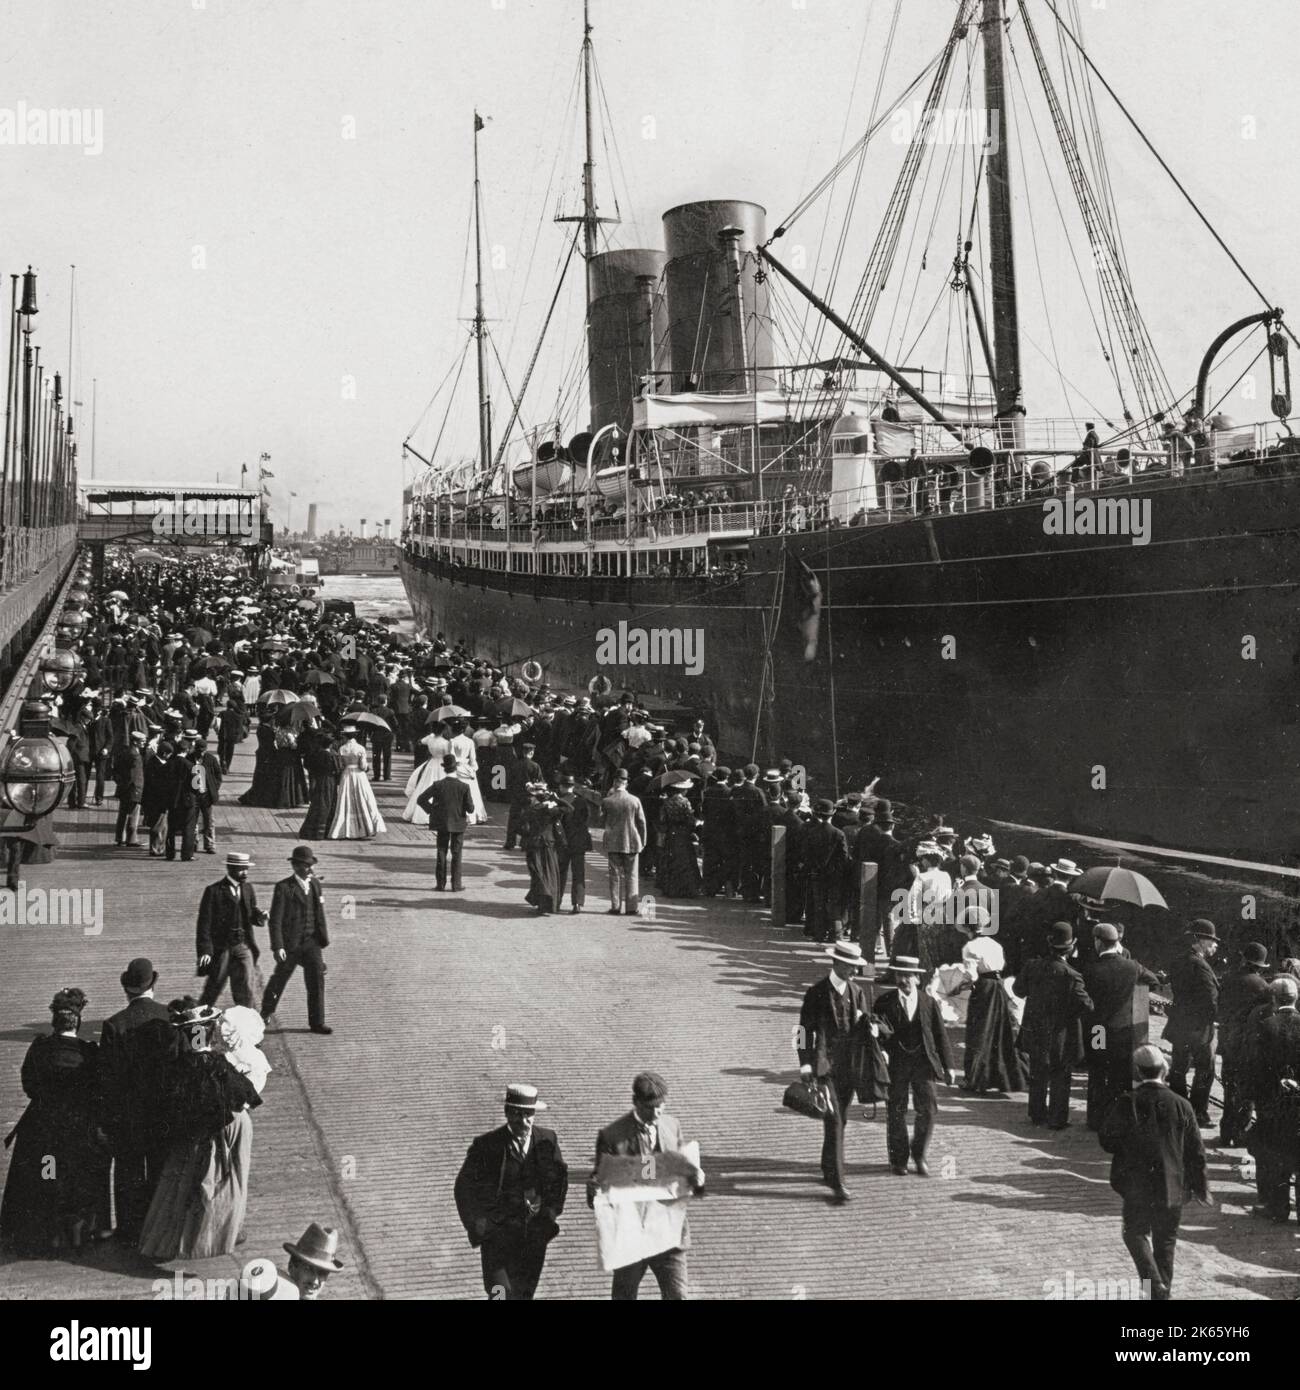 An early 20th century view of passengers, friends and family by a Transatlantic steamship at the Landing Stage opened in 1847 opposite the George's Pier head on the Liverpool Waterfront, England. Stock Photo